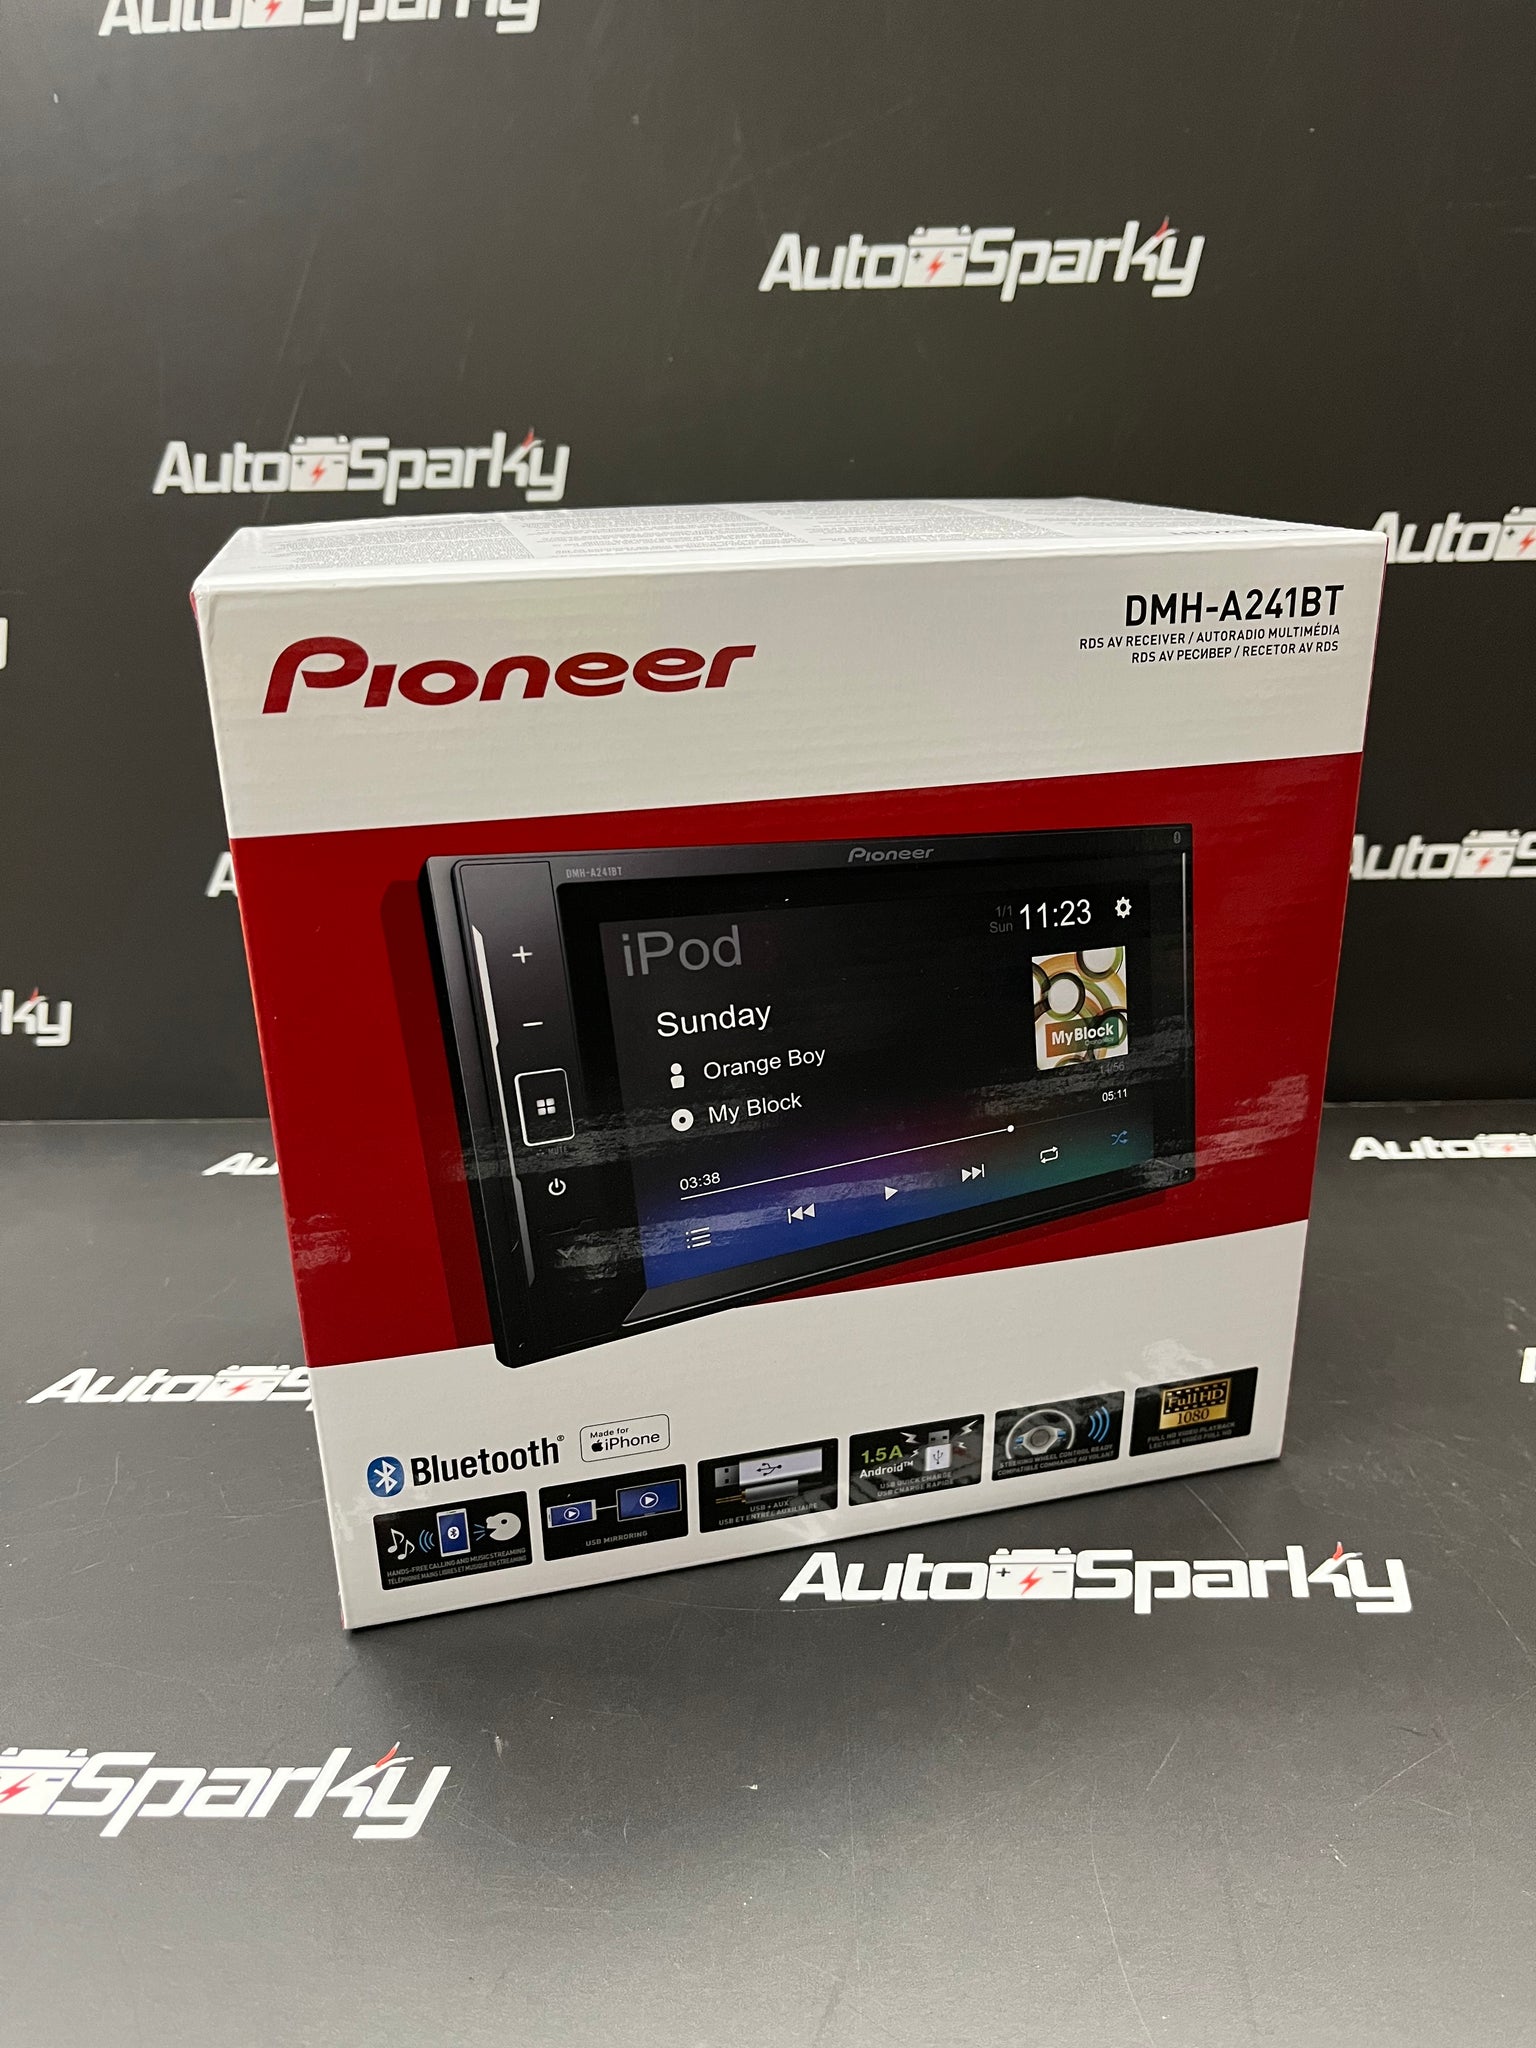 Pioneer DMH-A241BT ” Double Din Touch Screen Car Stereo Radio with – Auto  Sparky